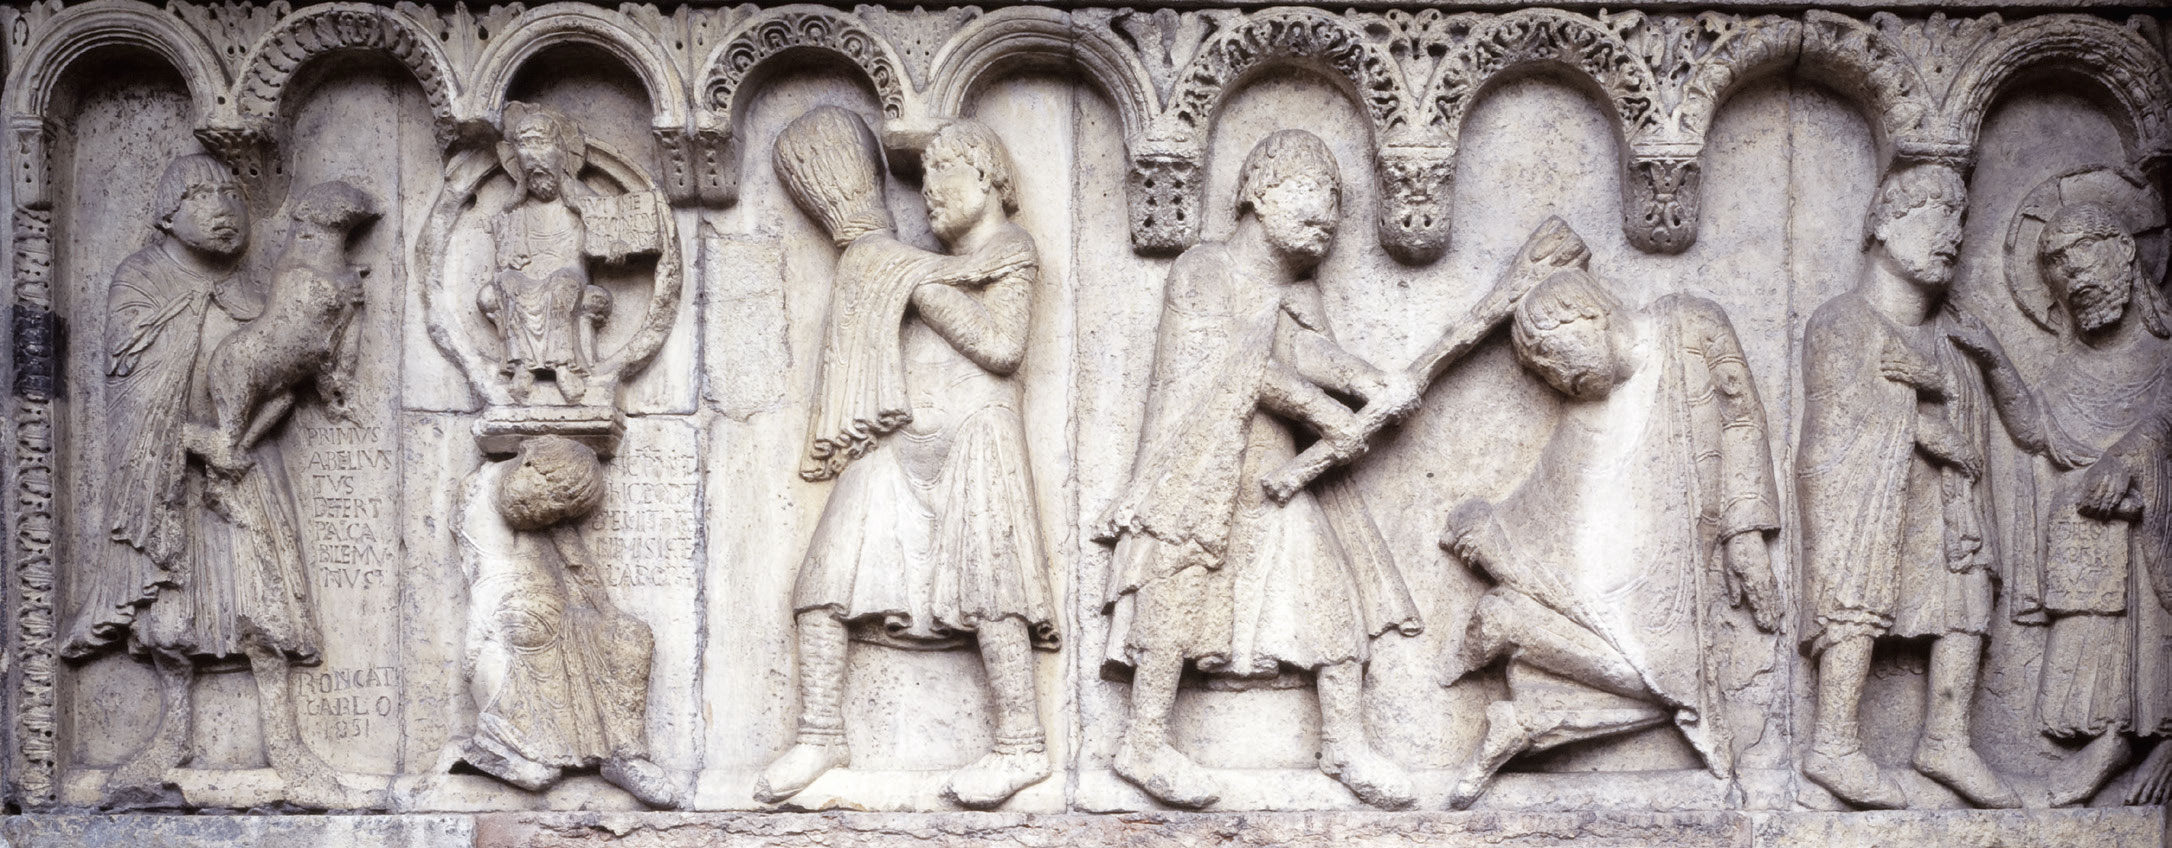 Wiligelmo, Stories from Genesis: the sacrifices of Cain and Abel, the slaying of Abel, and the encounter between God and Cain (c. 1099-1110; Vicenza soft stone; Modena, Duomo). Photo: Museums of the Cathedral of Modena